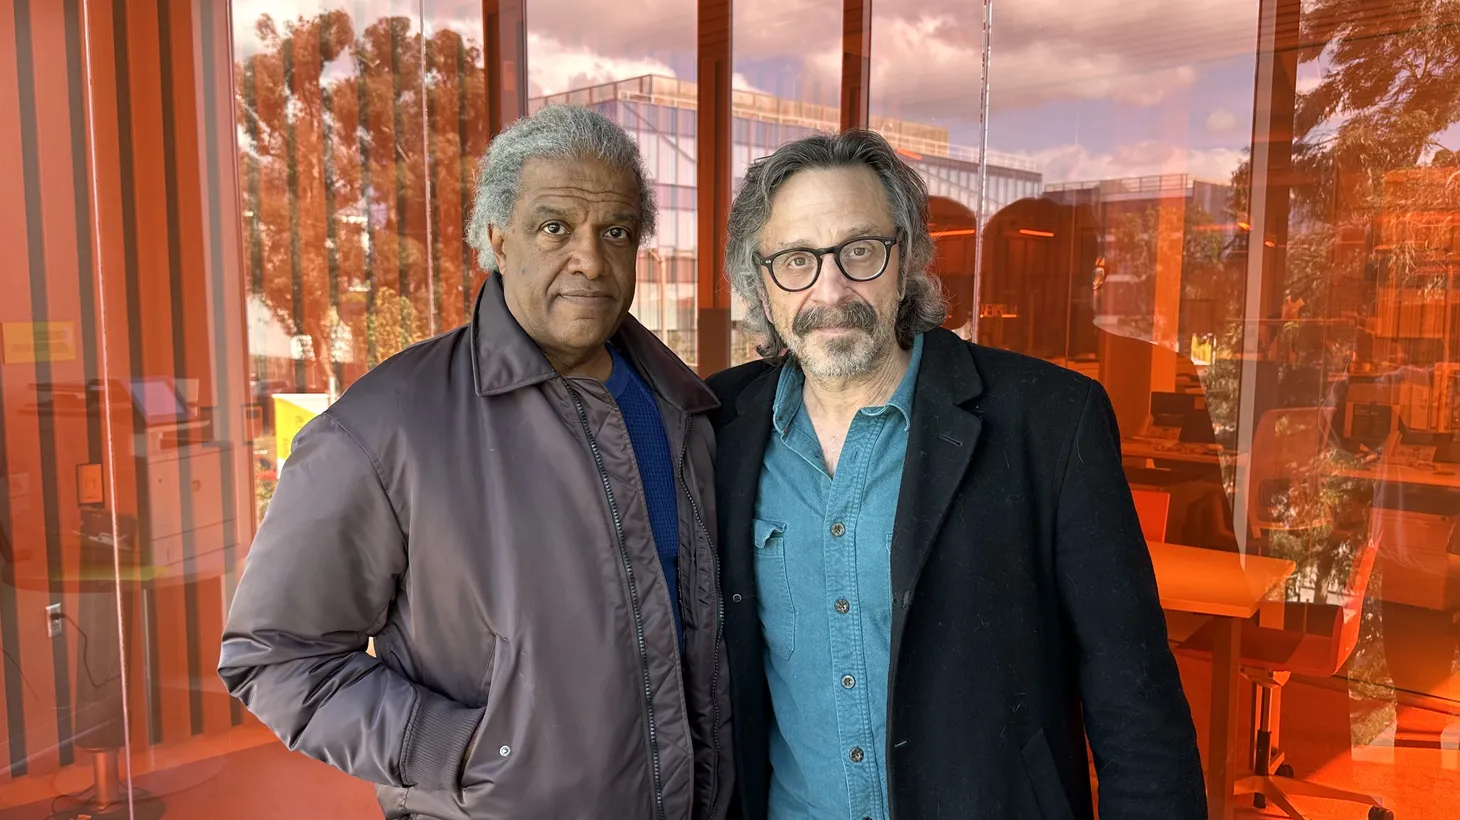 Marc Maron and Elvis Mitchell at KCRW HQ.